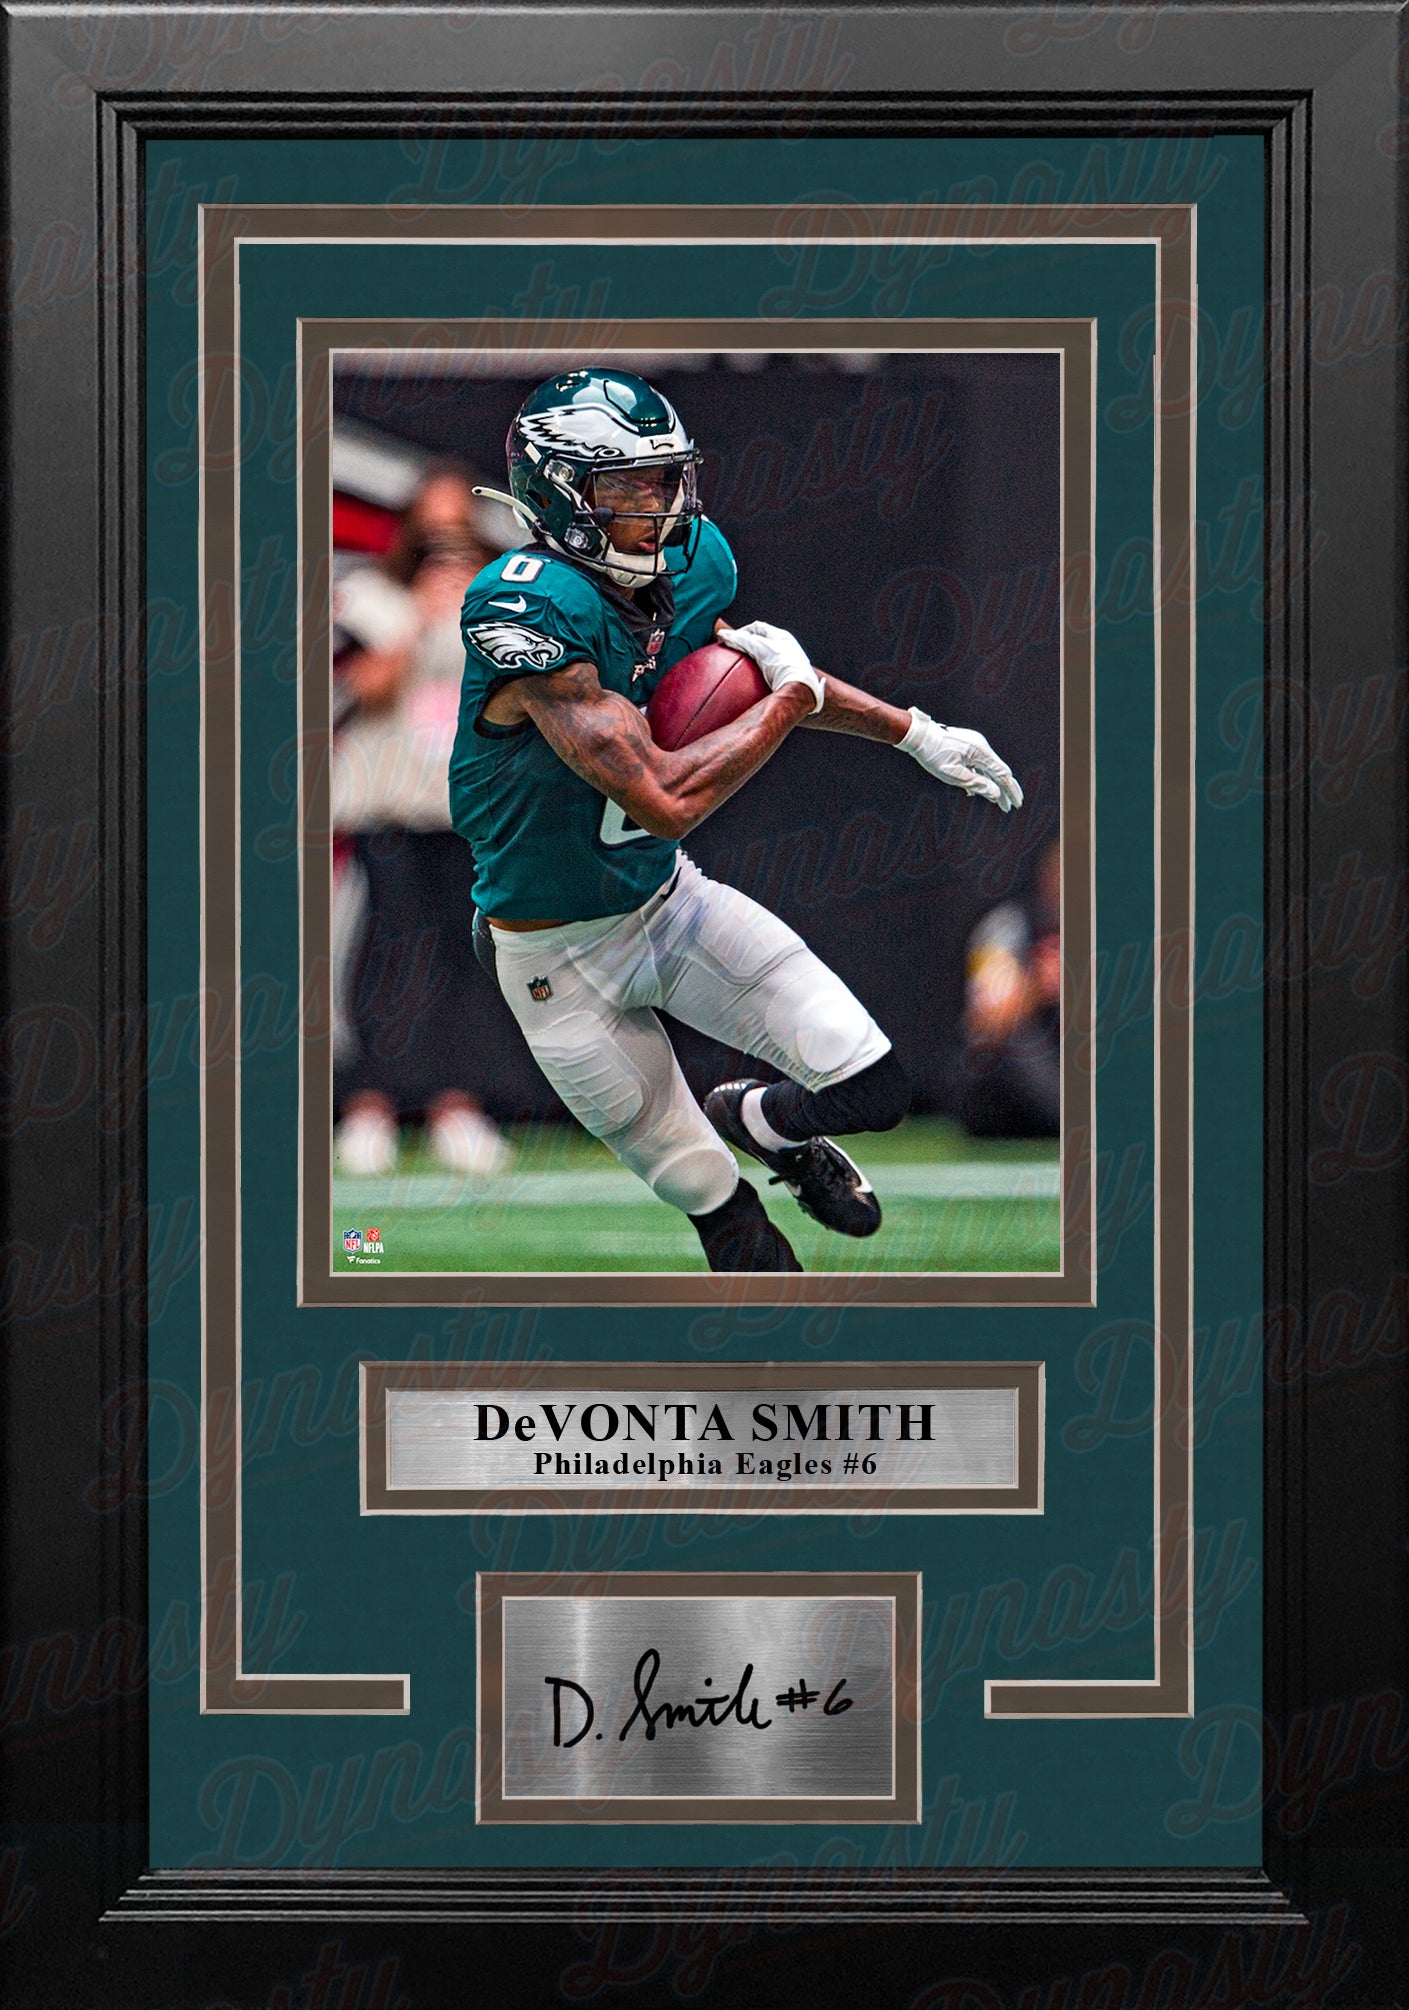 DeVonta Smith in Action Philadelphia Eagles 8 x 10 Framed Football Photo  with Engraved Autograph